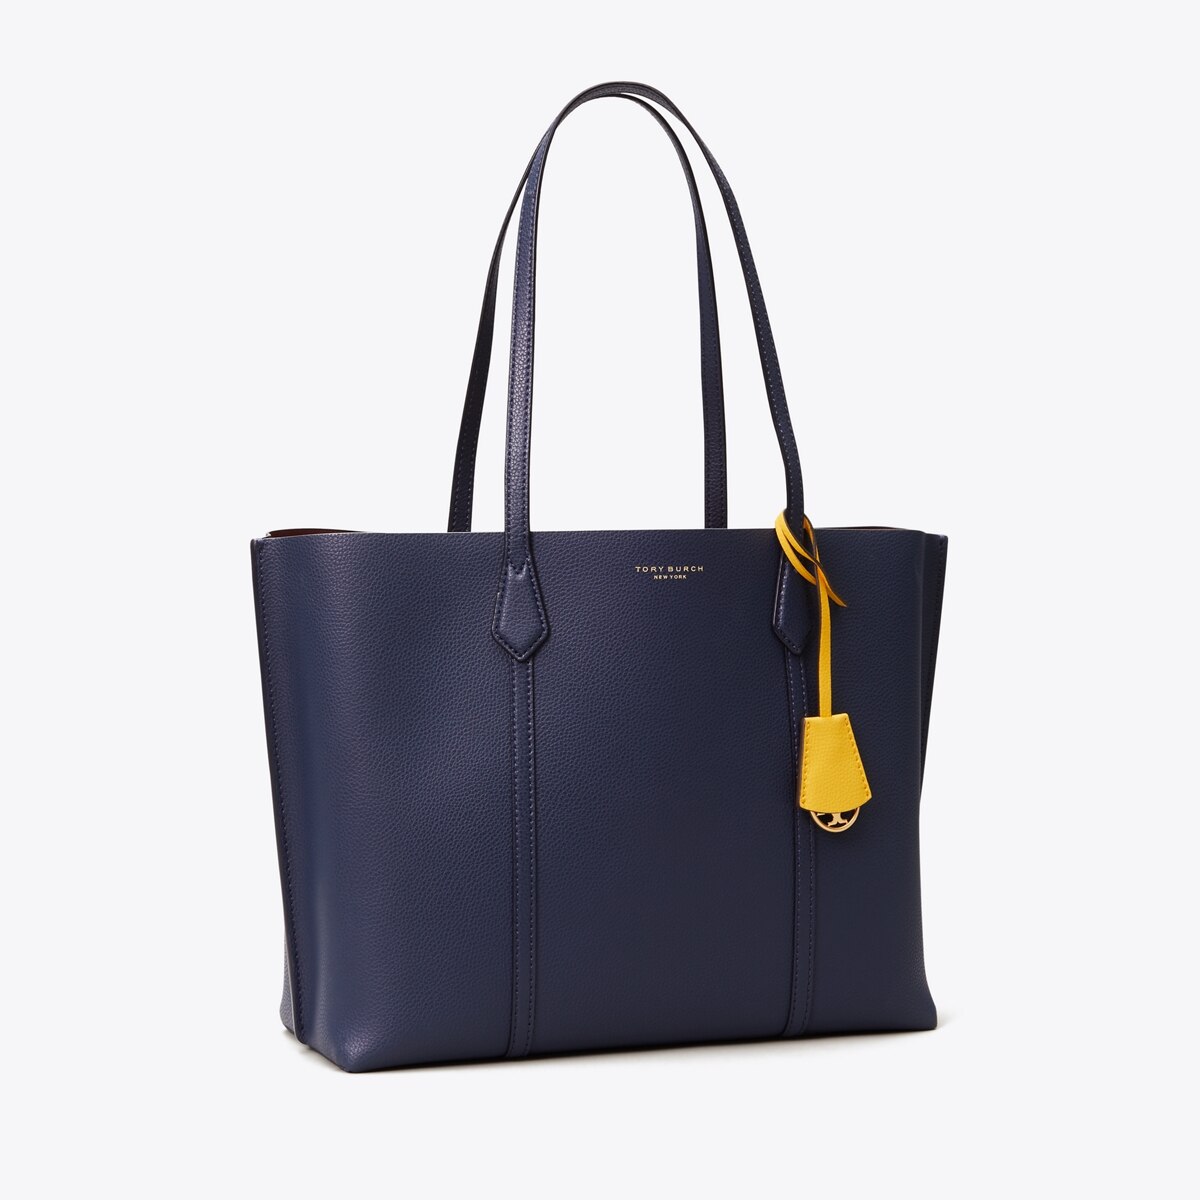 Tory Burch Perry Triple-compartment Tote: Women's Handbags